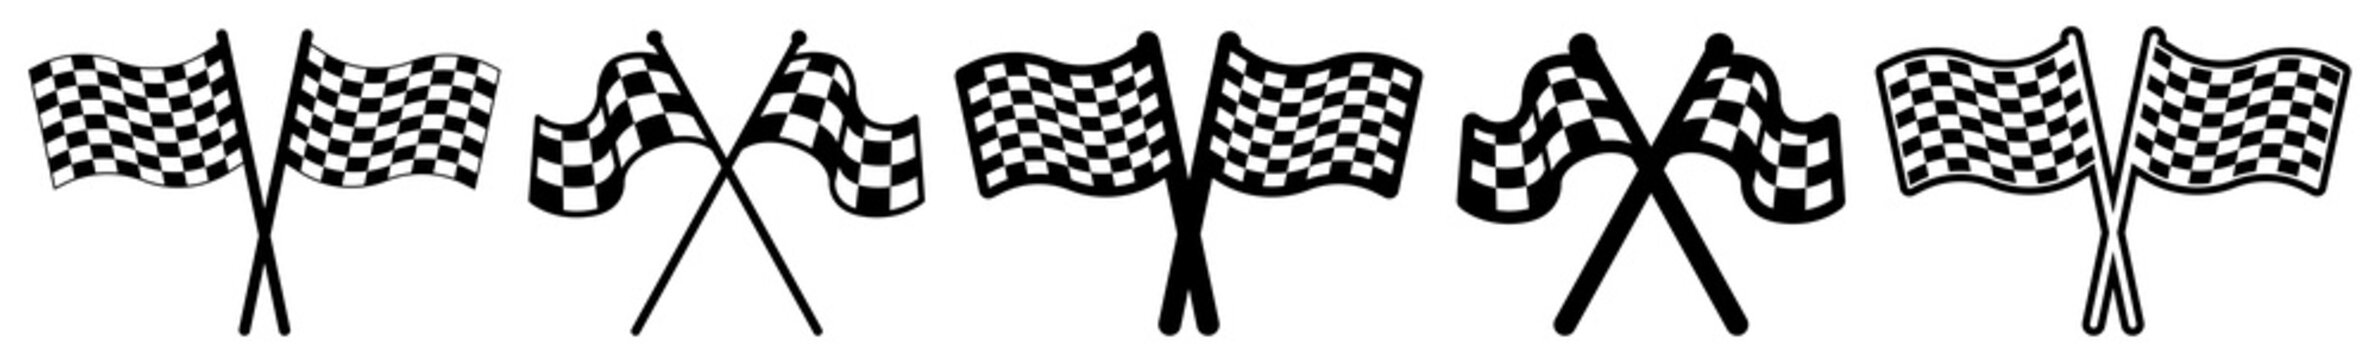 Chequered Flag Icon Racing Chequered Flag Set | Chequered Flags Icon Racing Vector Illustration Logo | Racing-Flag Icon Isolated Crossed Chequered-Flag Collection